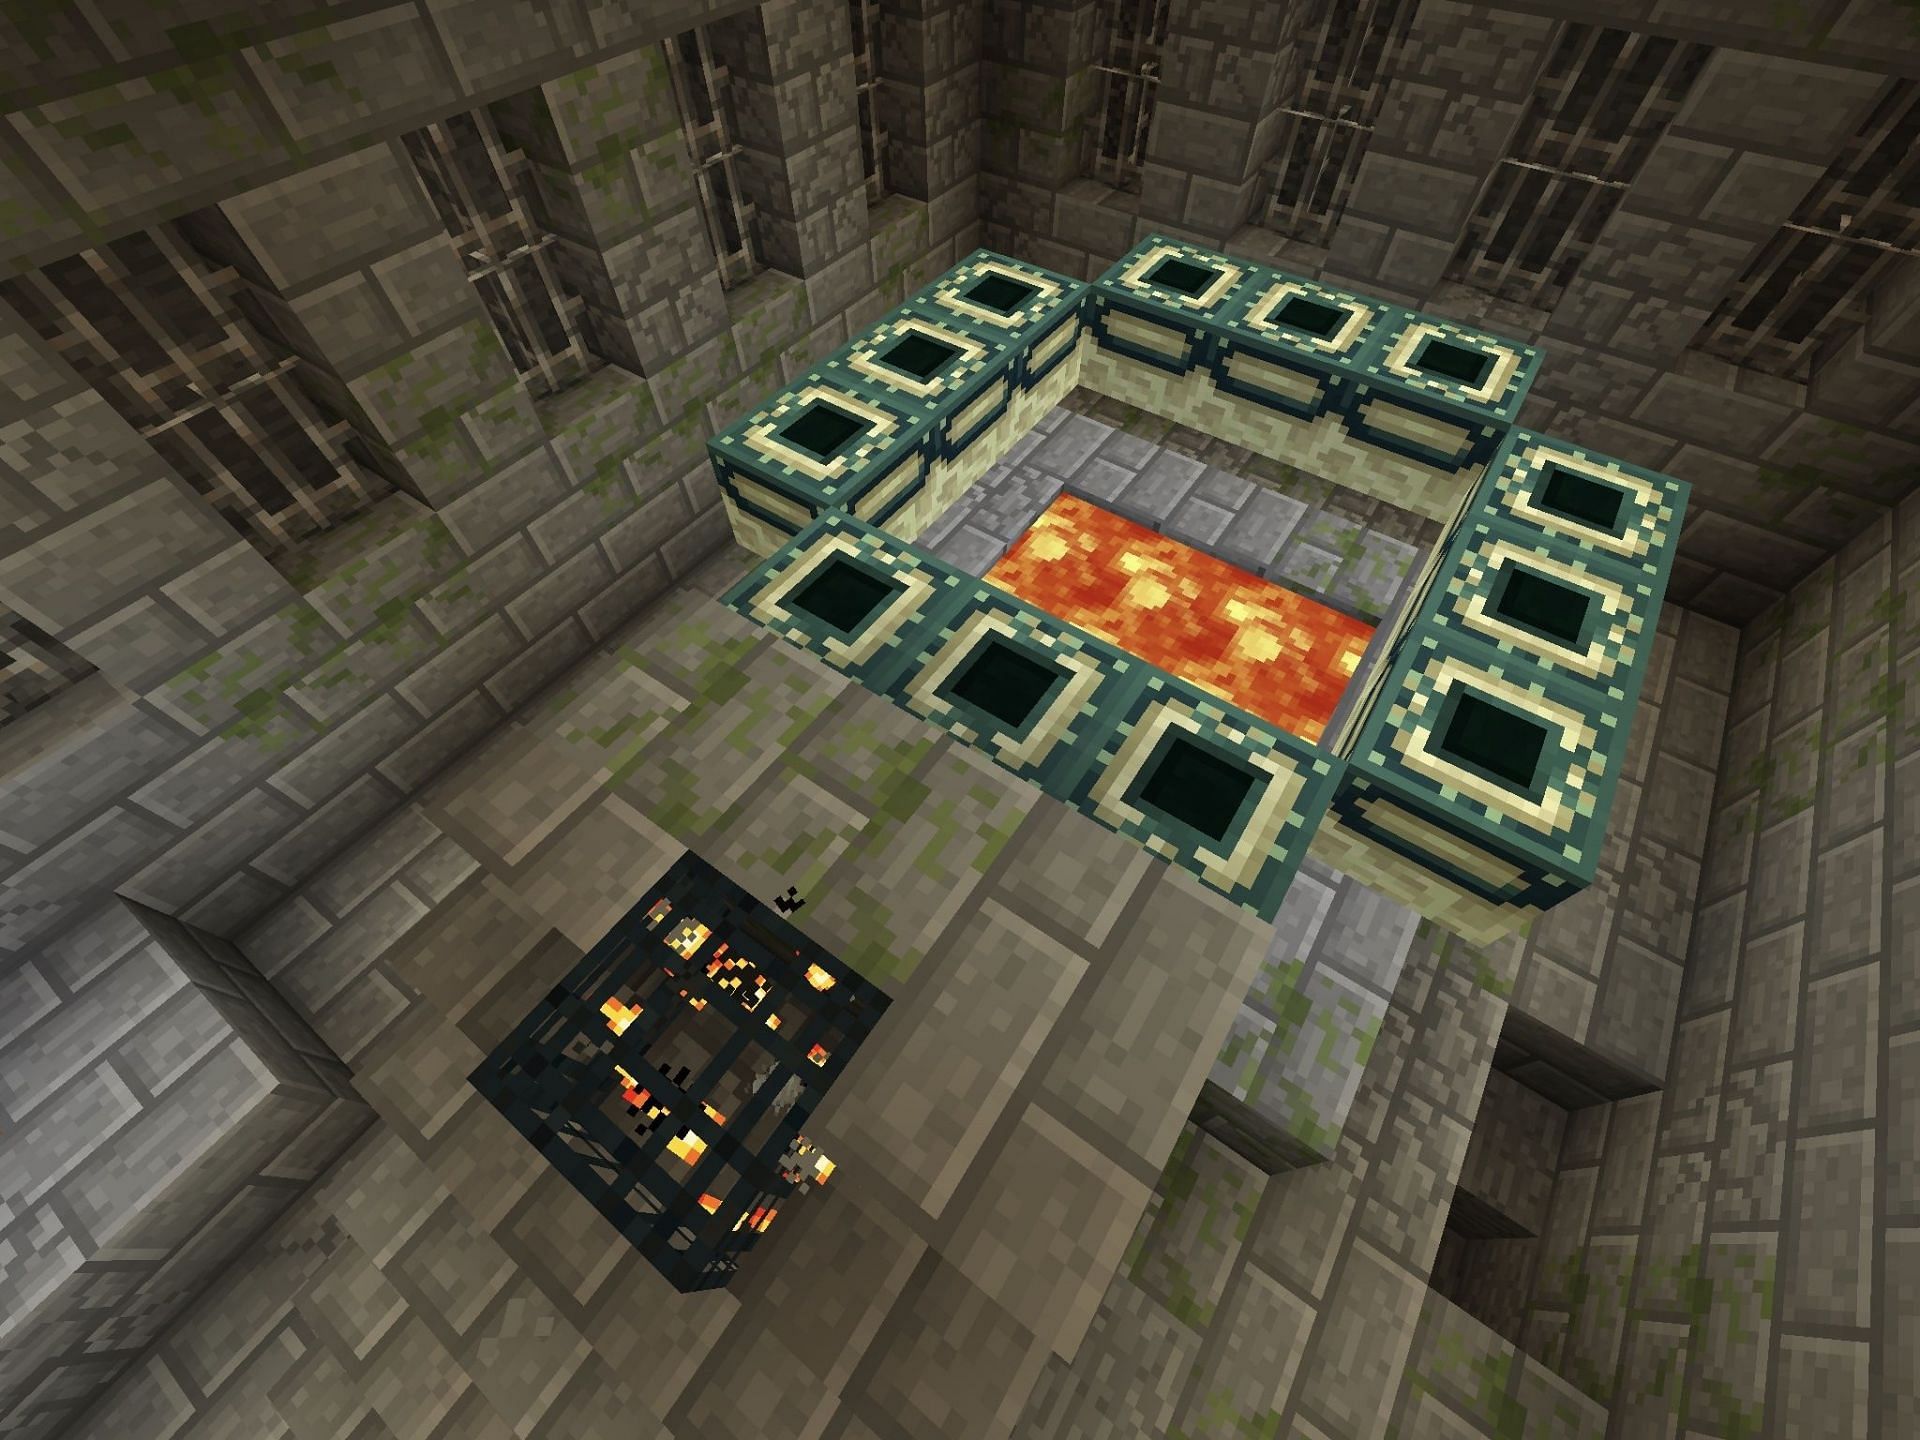 Strongholds play host to the End Portal (Image via Minecraft)